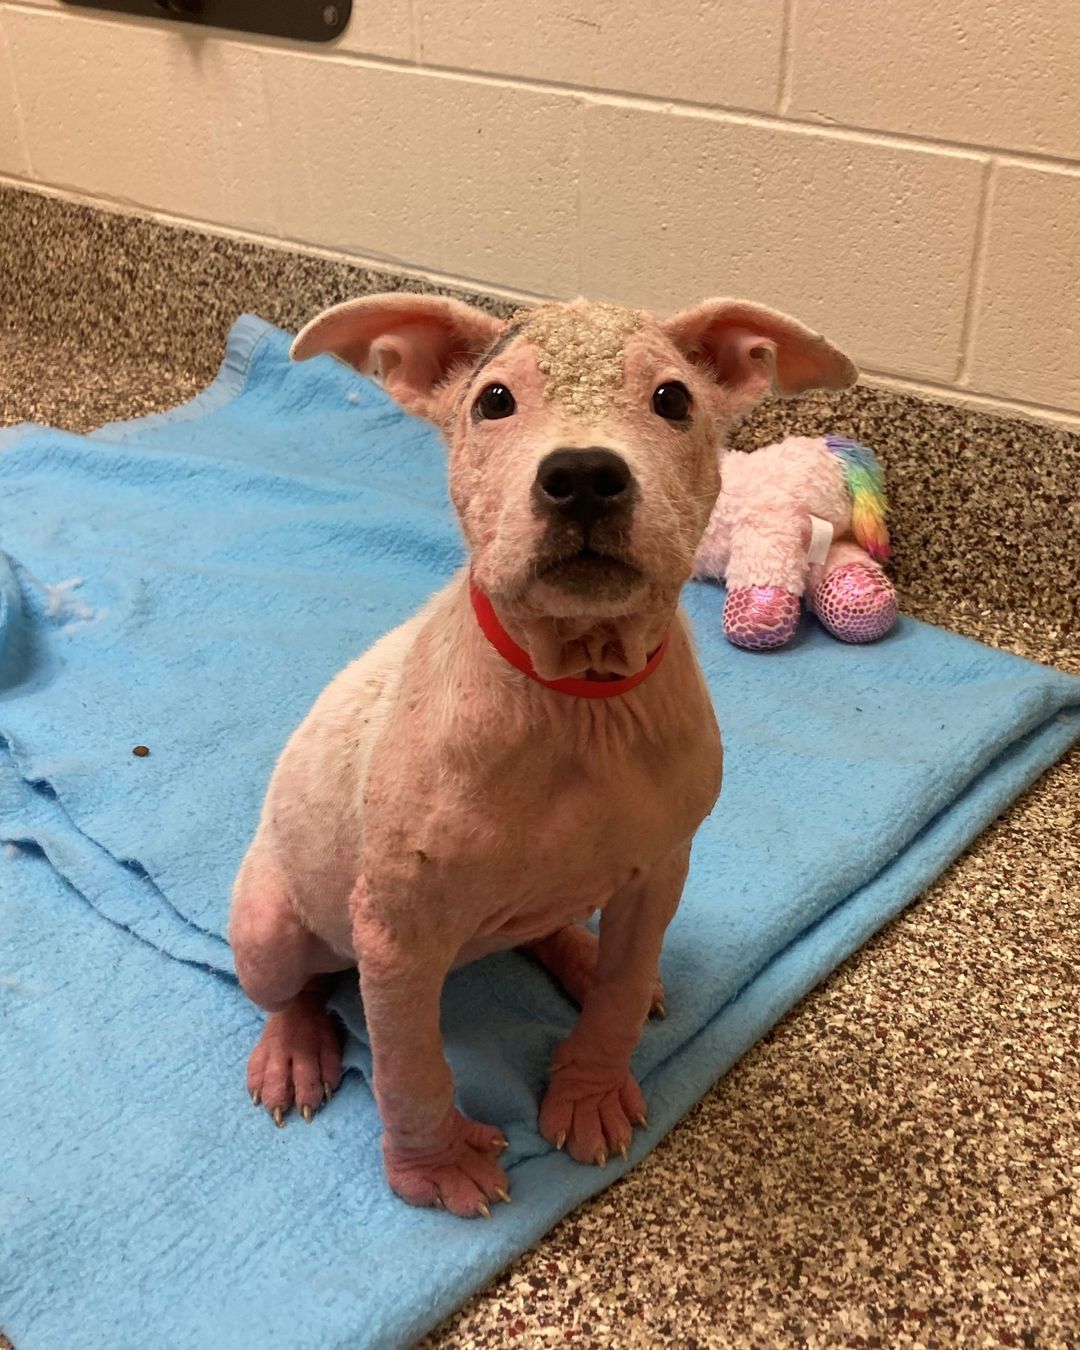 Thank you to everyone for all of the well wishes for Lola. She is feeling a lot better. She is still a little itchy, but she is loving all of the love and attention from our staff and volunteers. <a target='_blank' href='https://www.instagram.com/explore/tags/shelterdog/'>#shelterdog</a> <a target='_blank' href='https://www.instagram.com/explore/tags/rescuedog/'>#rescuedog</a>